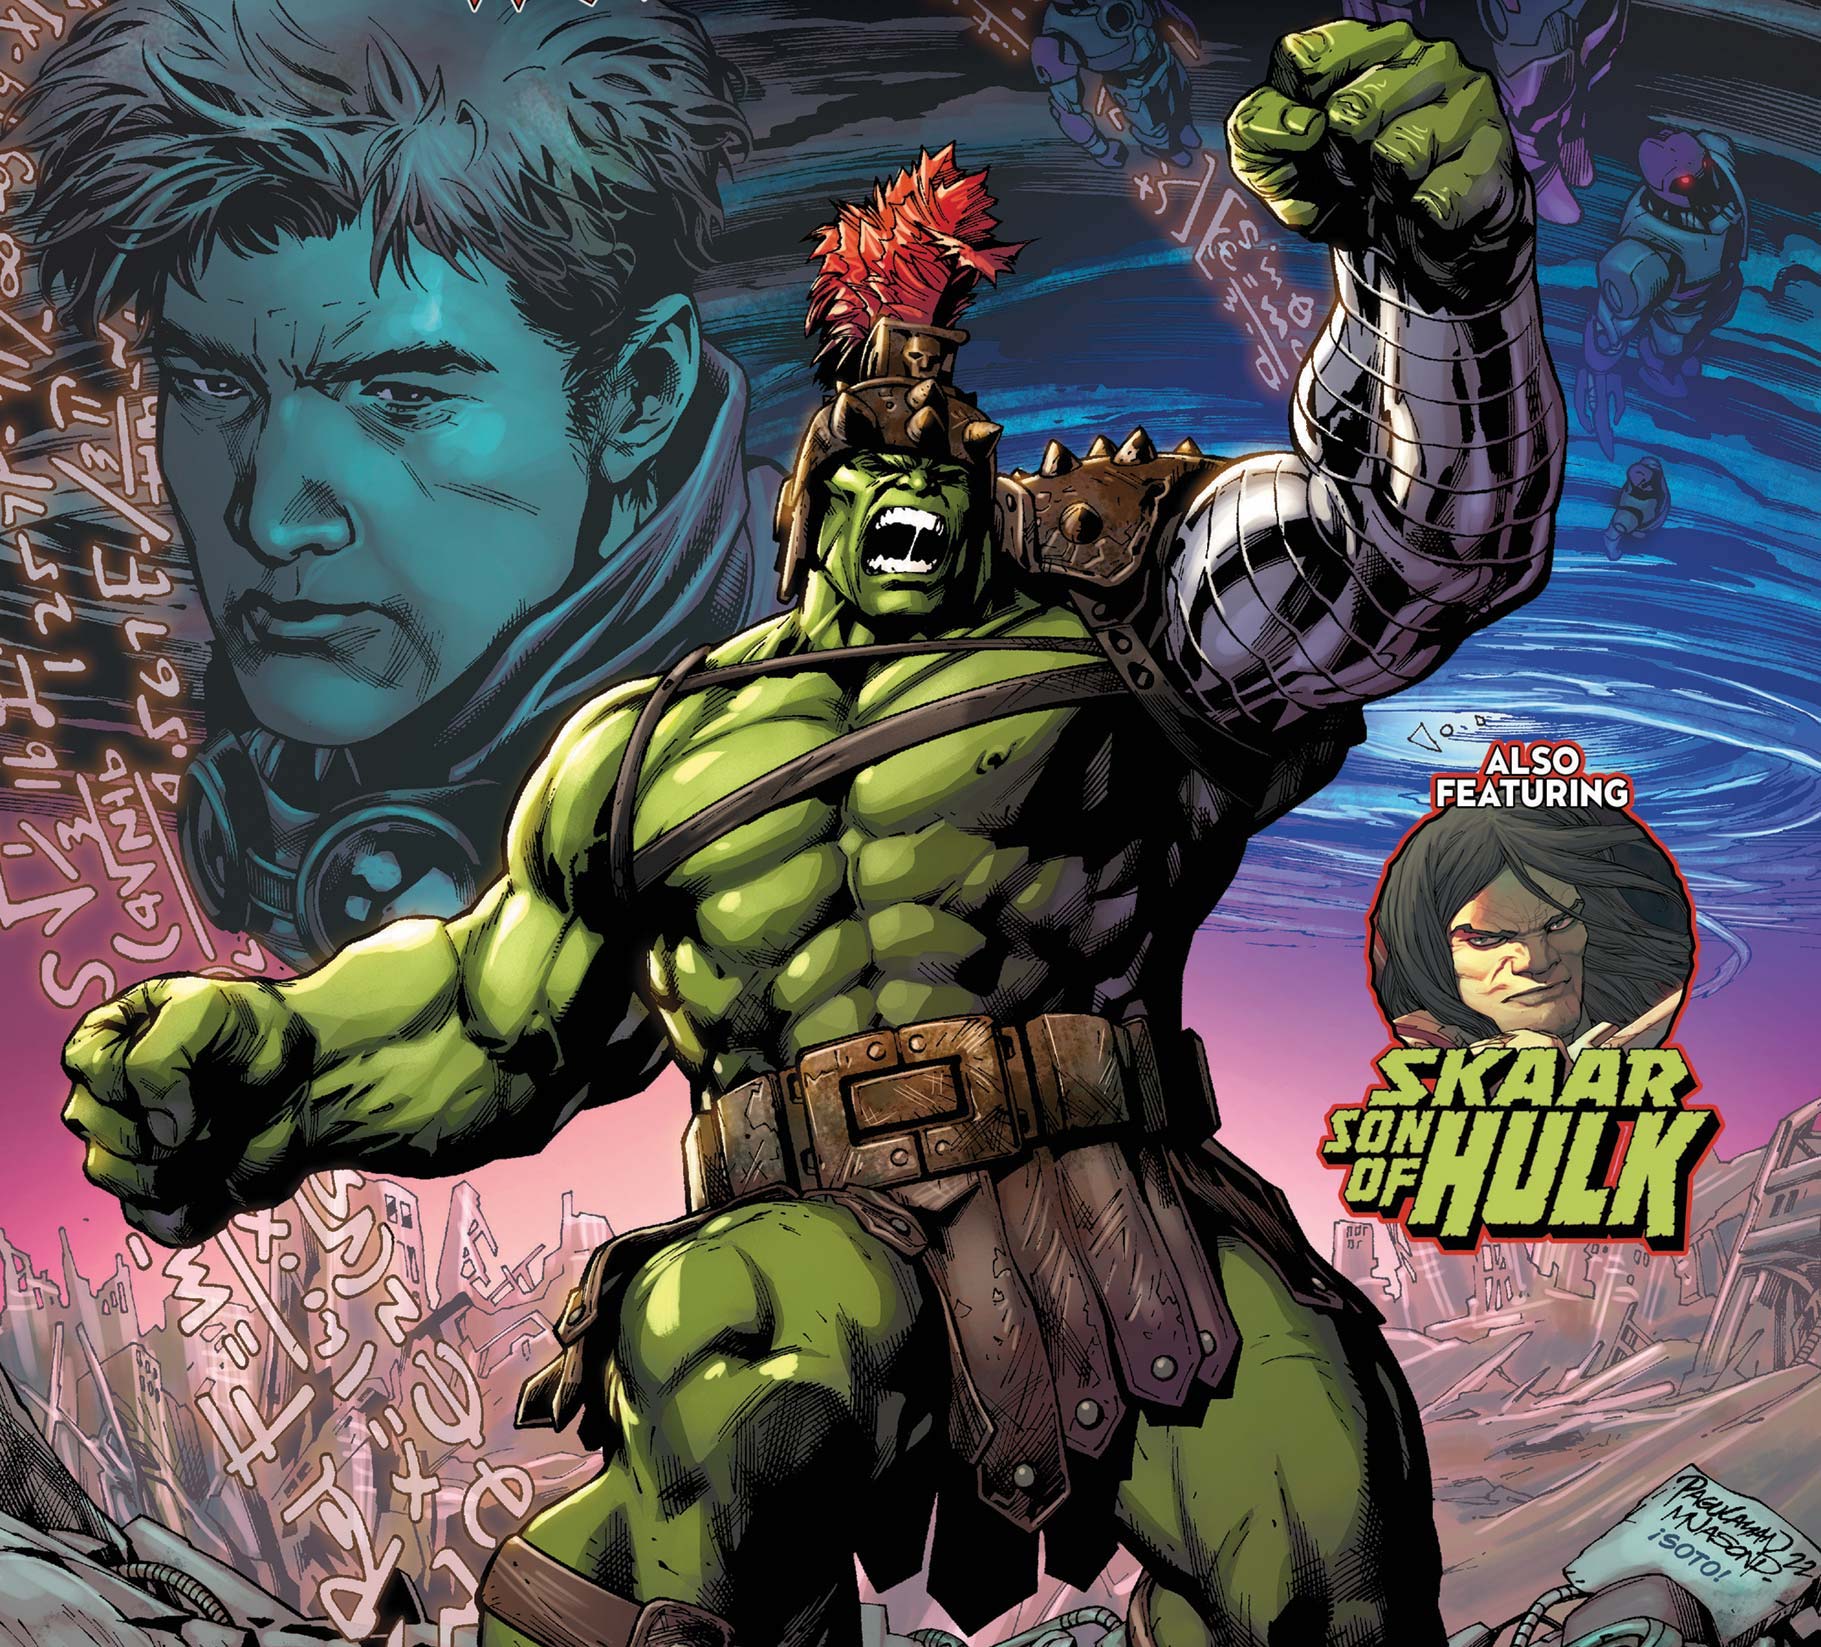 'Planet Hulk: Worldbreaker' #1 introduces a narrative 1,000 years into the future